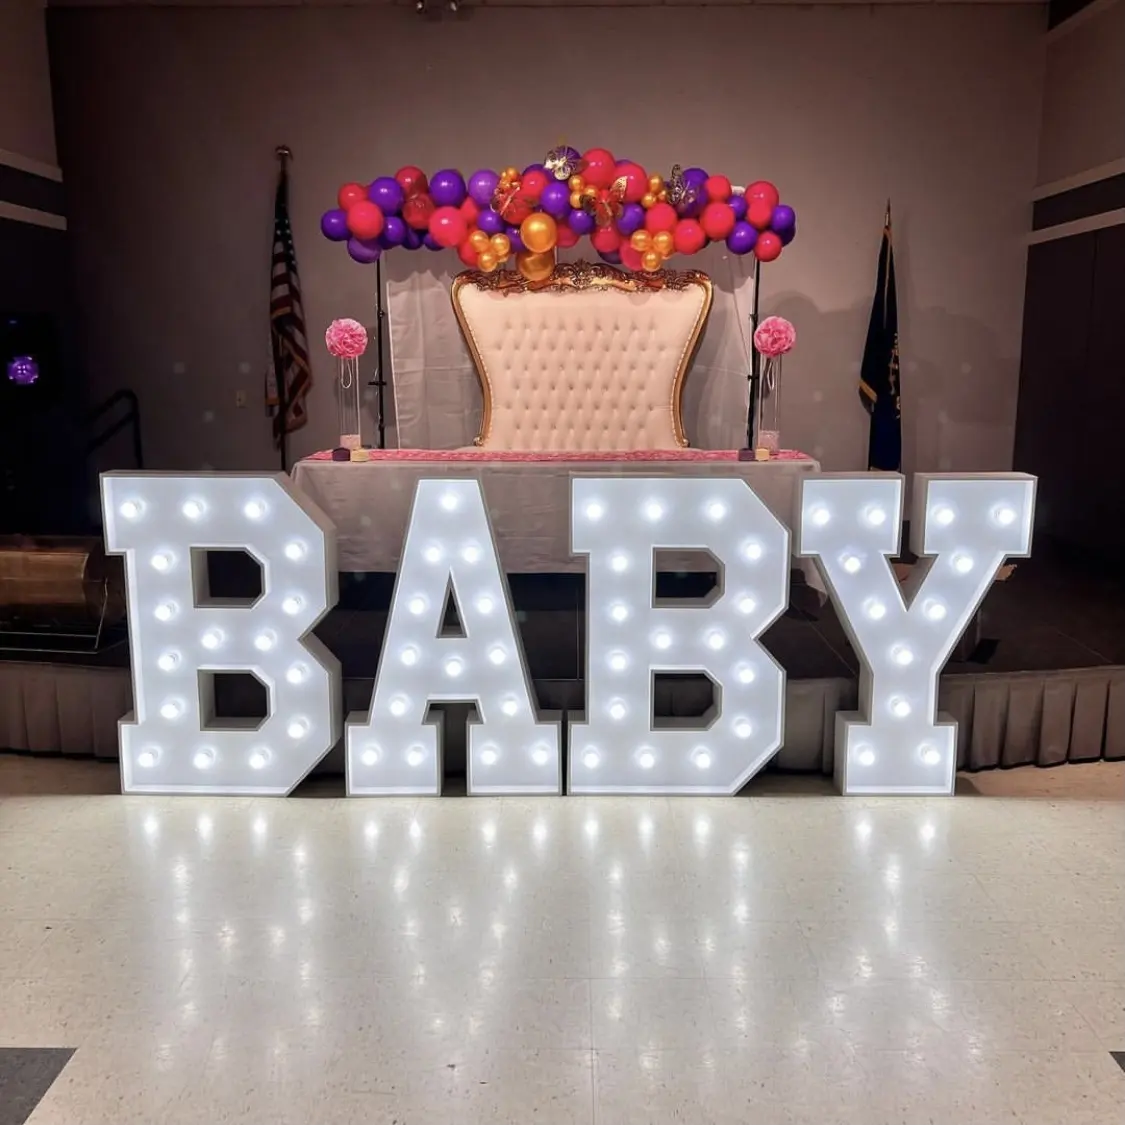 LOVE BABY Marquee Letter Sign Led Lights Up White Metal Letters 3ft 4ft Led Bulb Wedding Letters